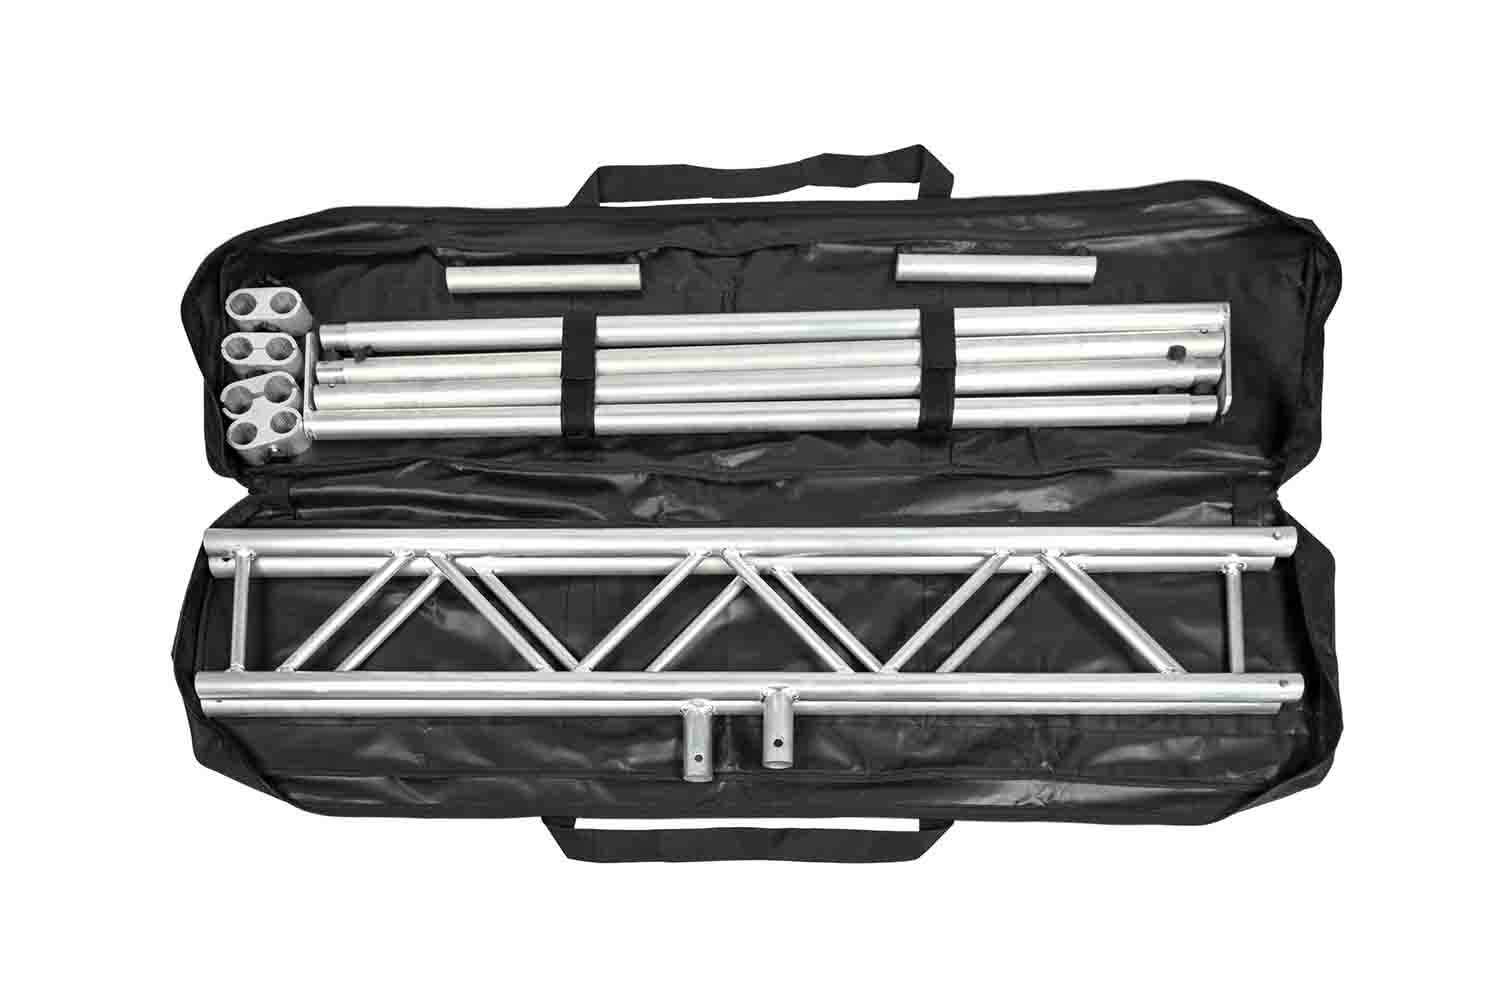 Headliner HL30022 Indio Lighting Bar Pro - BOOTH NOT INCLUDED - Hollywood DJ